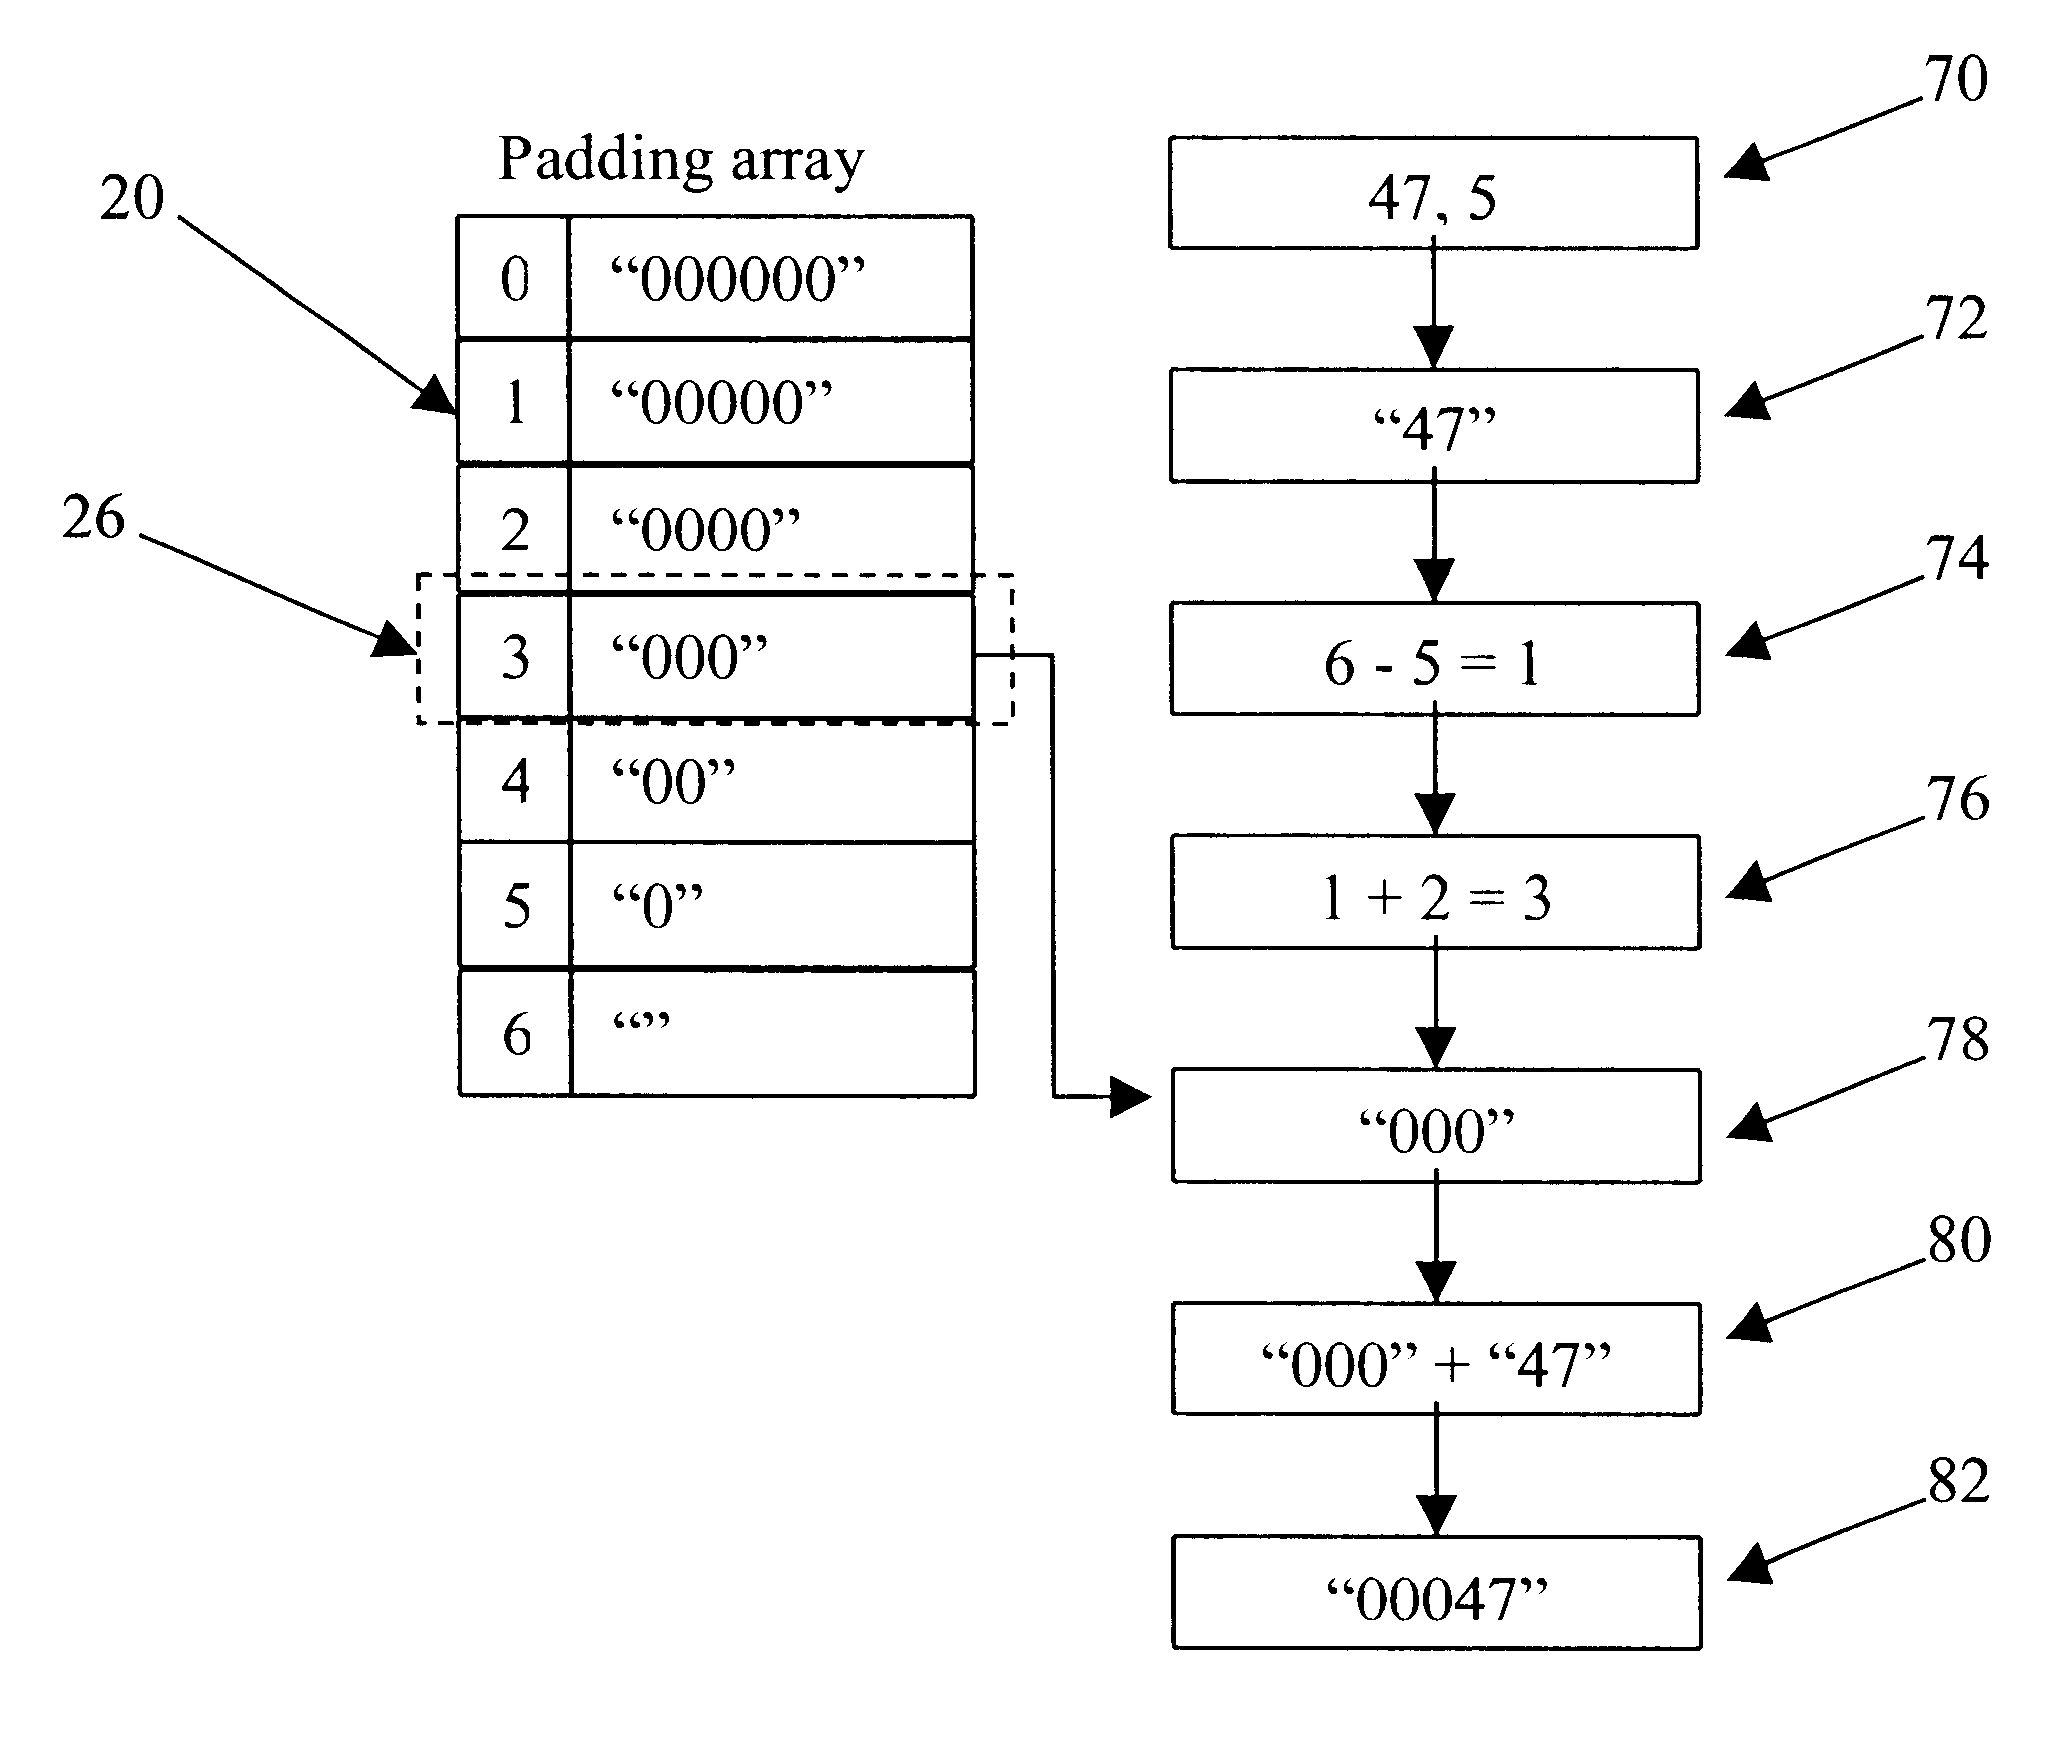 Method of formatting values in a fixed number of spaces using the java programming language